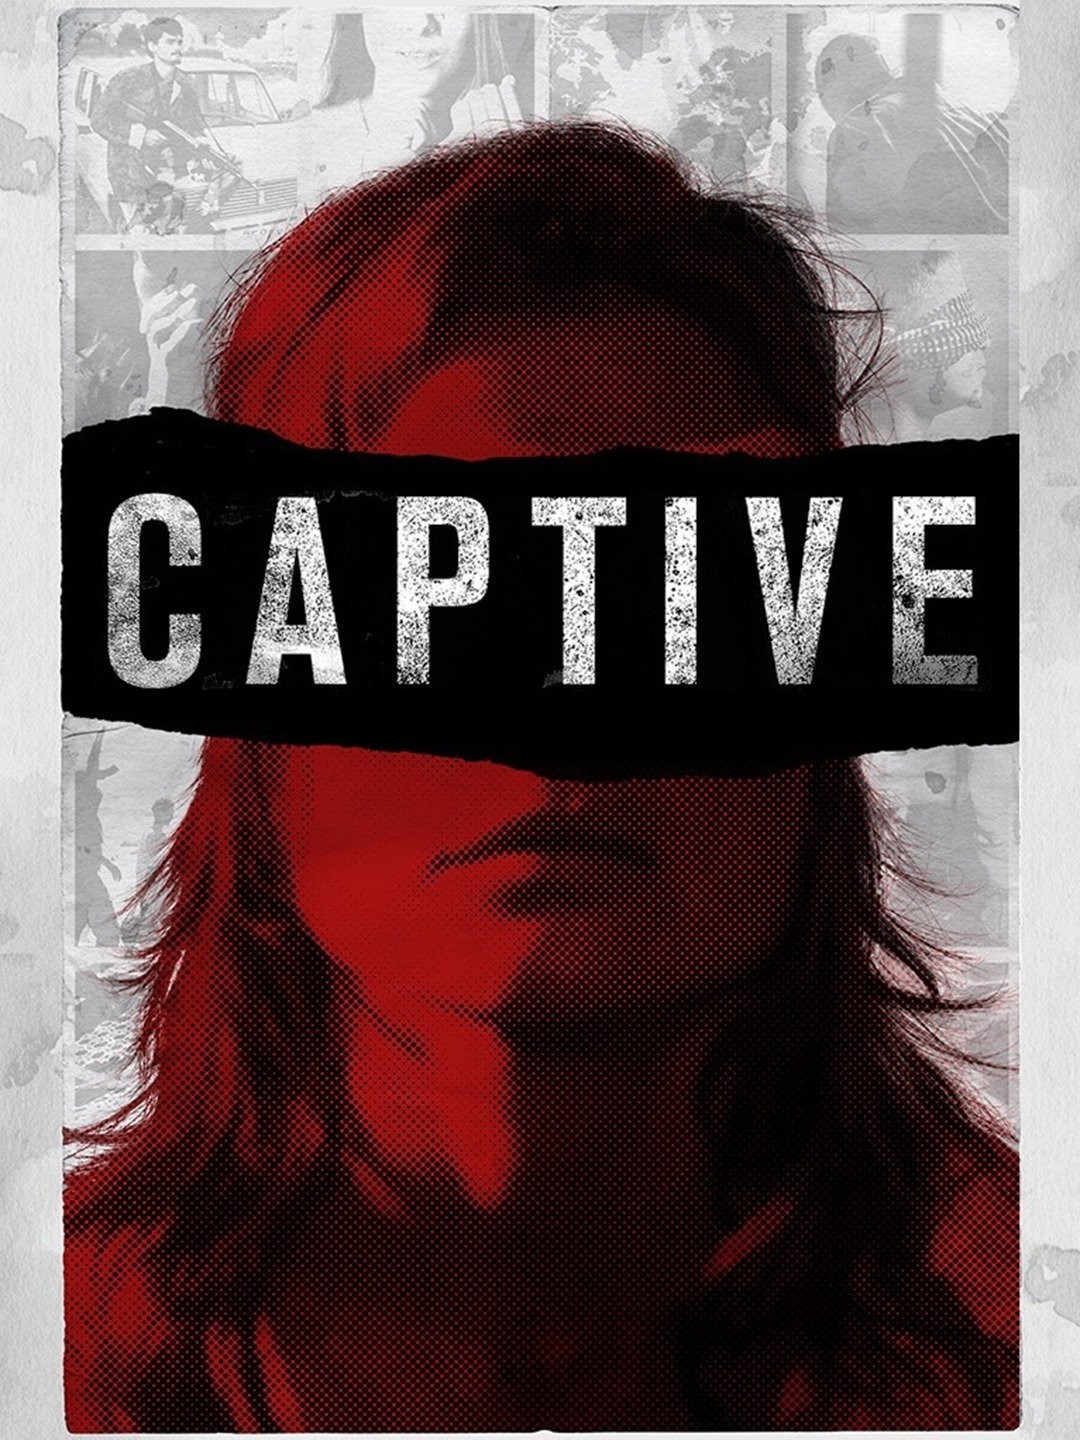 The Captive - Rotten Tomatoes